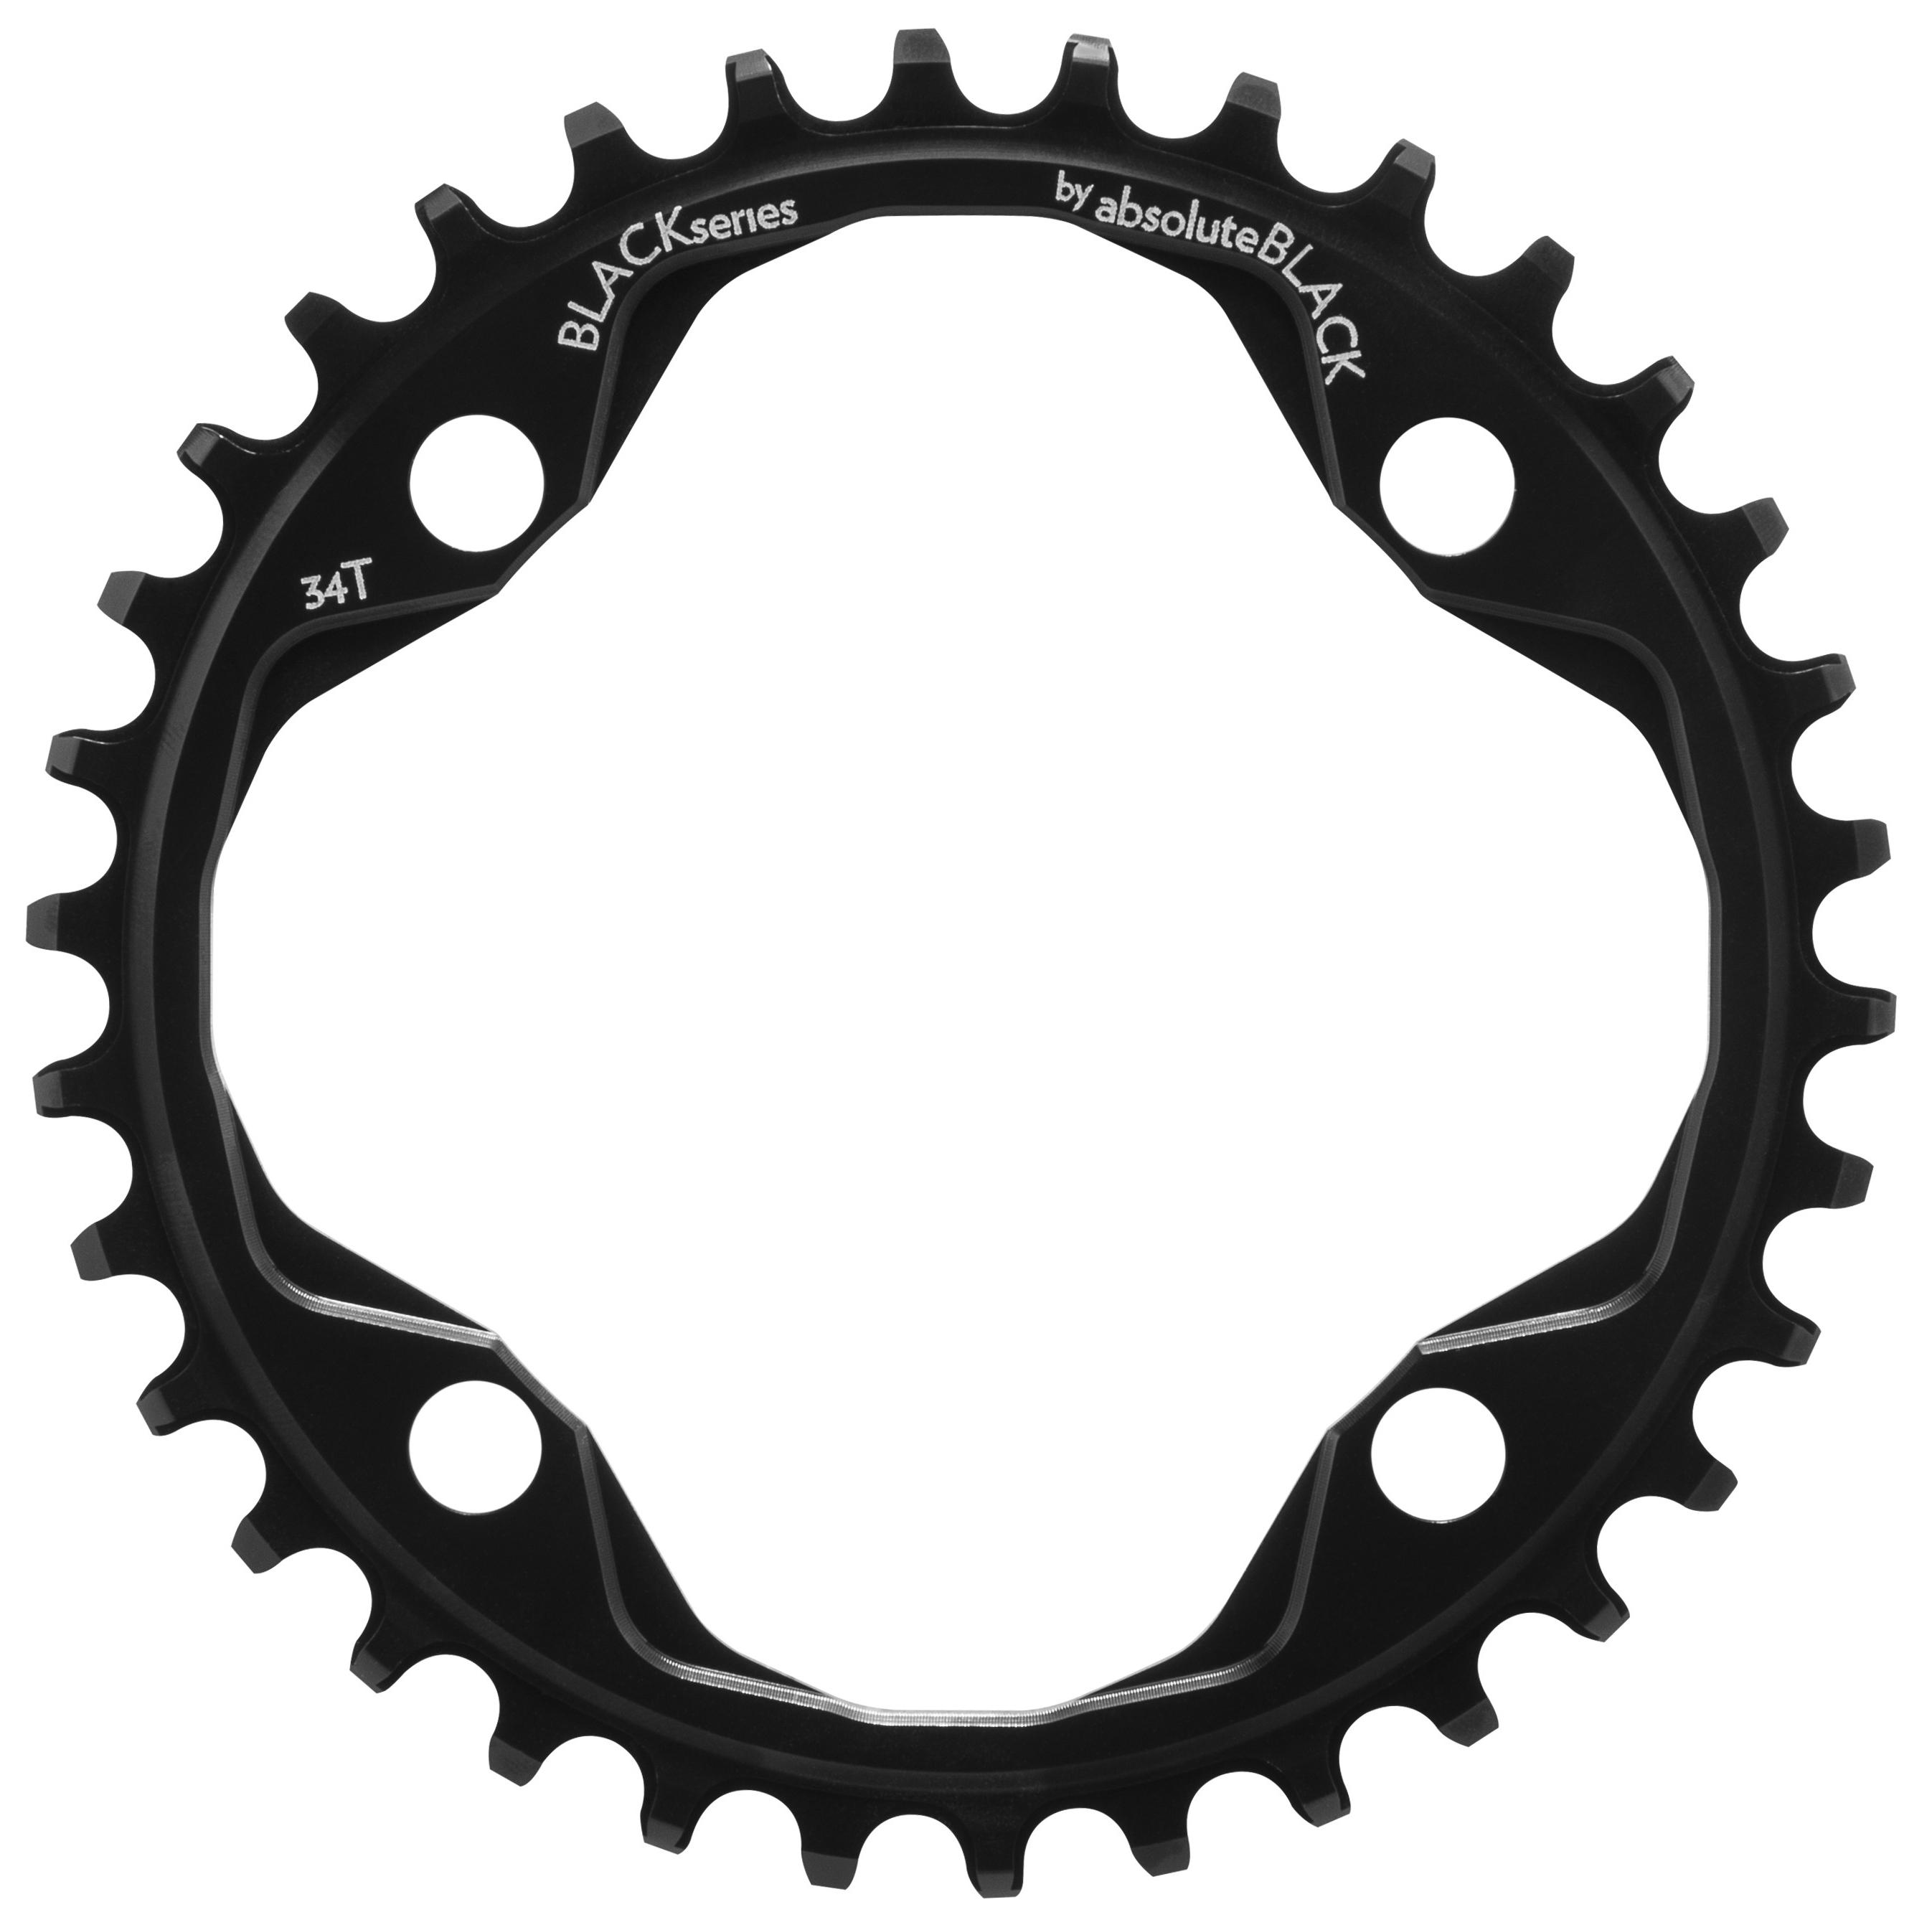 Black By Absolutebla Narrow Wide Chainring